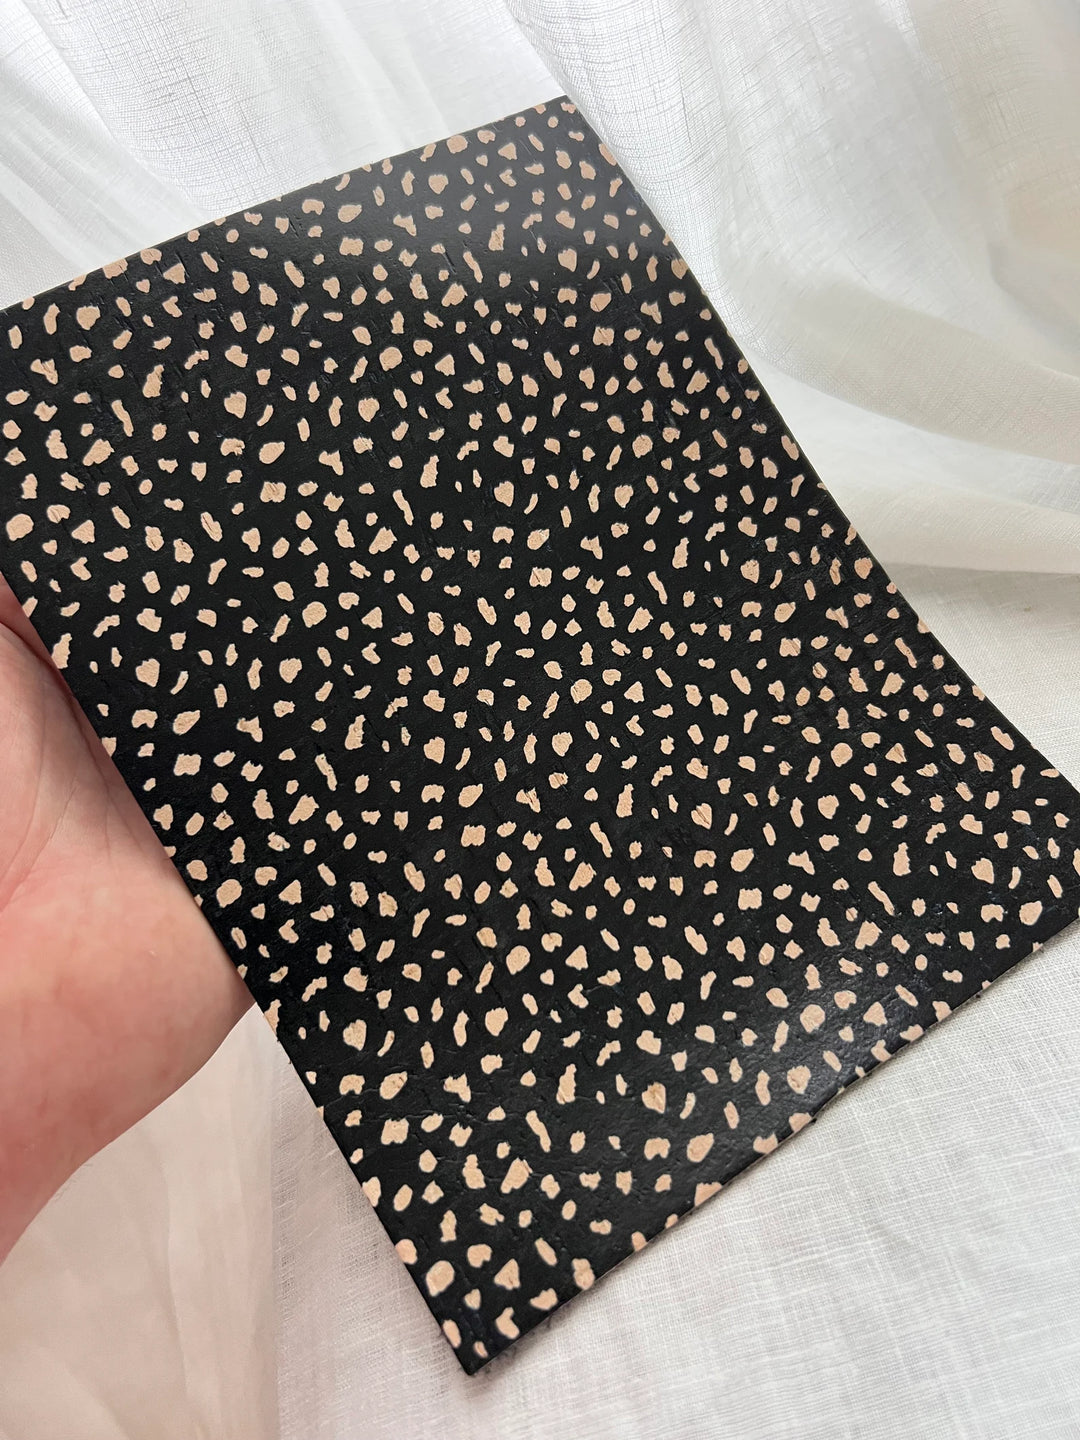 PRE ORDER Leopard Print Leather Backed Cork Sheet, for DIY Earrings - Genuine Printed Leather